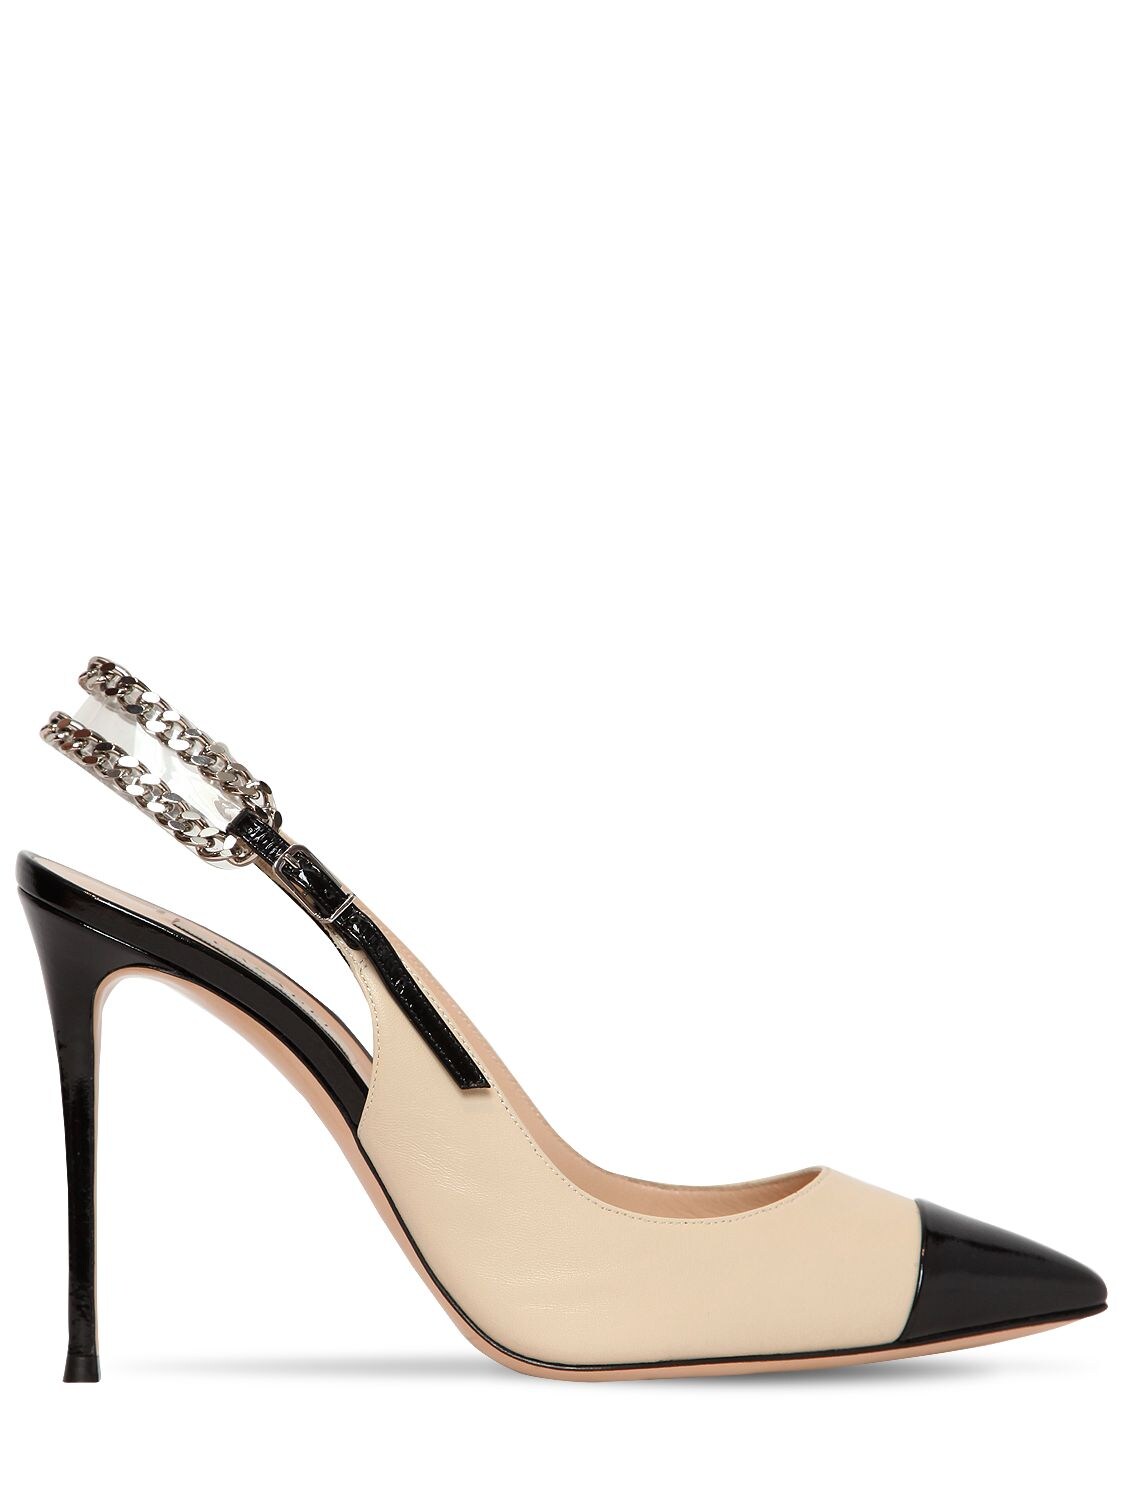 Casadei 100mm Chained Leather Sling Back Pumps In Beige,black